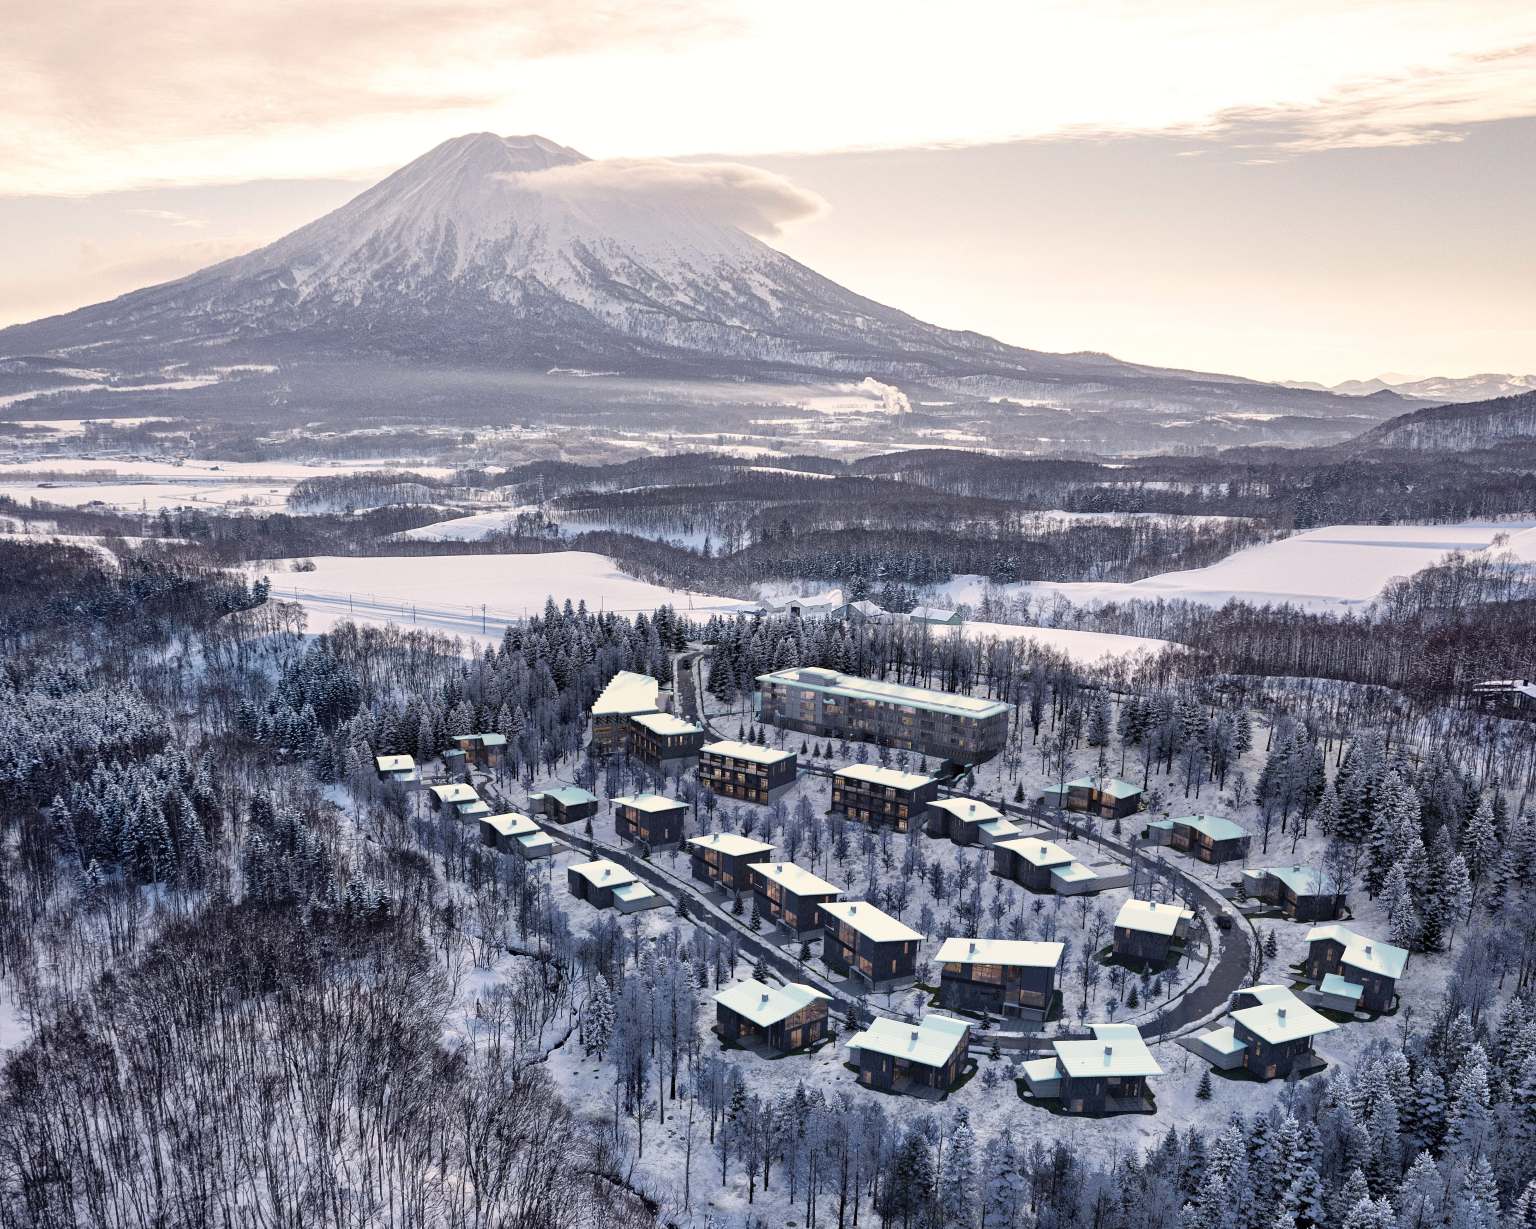 Are you looking for the best powder in Asia? Perhaps you’re looking for an investment opportunity in a booming destination? Niseko’s Hanacreek offers a bit of both.